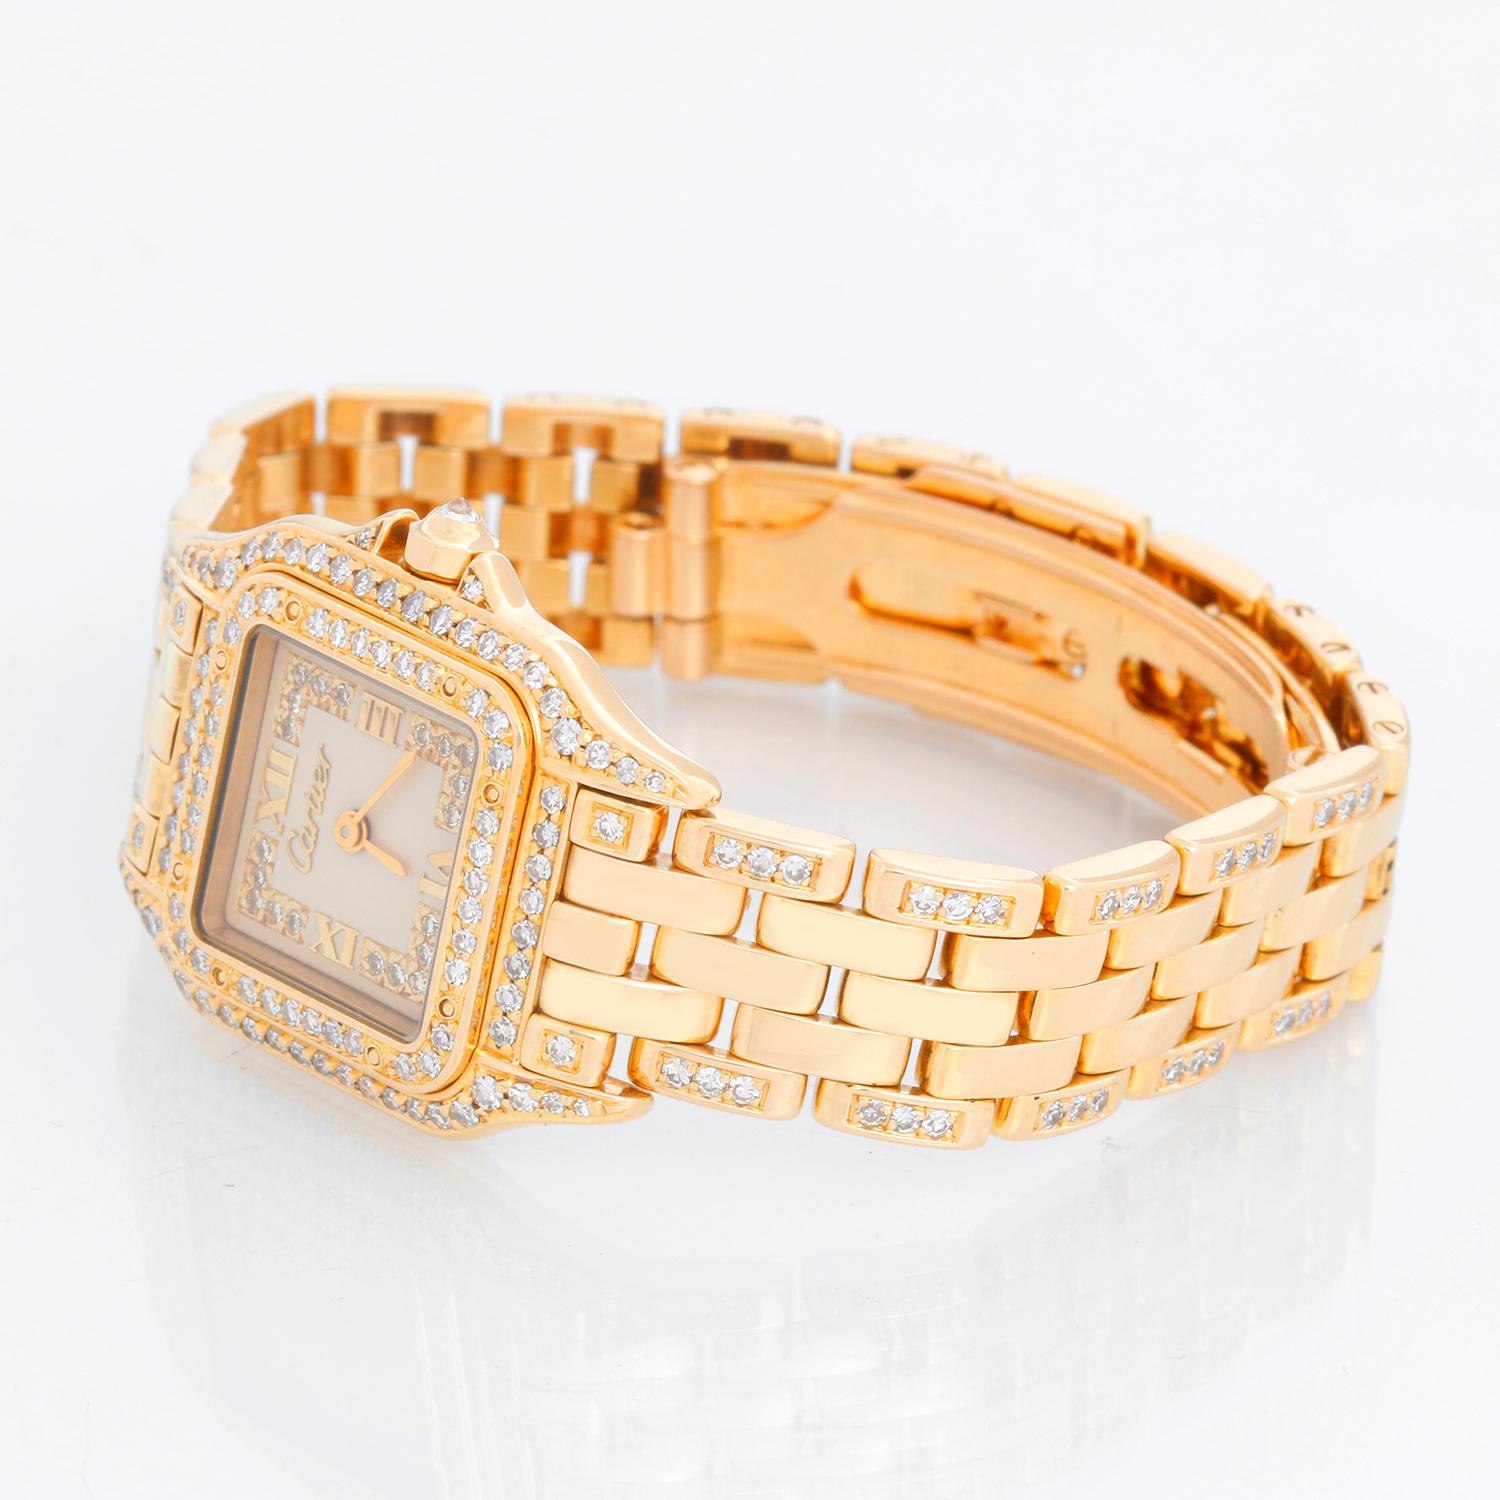 Cartier Panther Ladies 18k Yellow Gold Diamond Watch - Quartz. 18k yellow gold case with factory diamond bezel (21mm x 30mm). Creme colored dial with raised gold Roman numeral at noon and 6 o'clock and pave diamonds. 18k yellow gold Panther bracelet